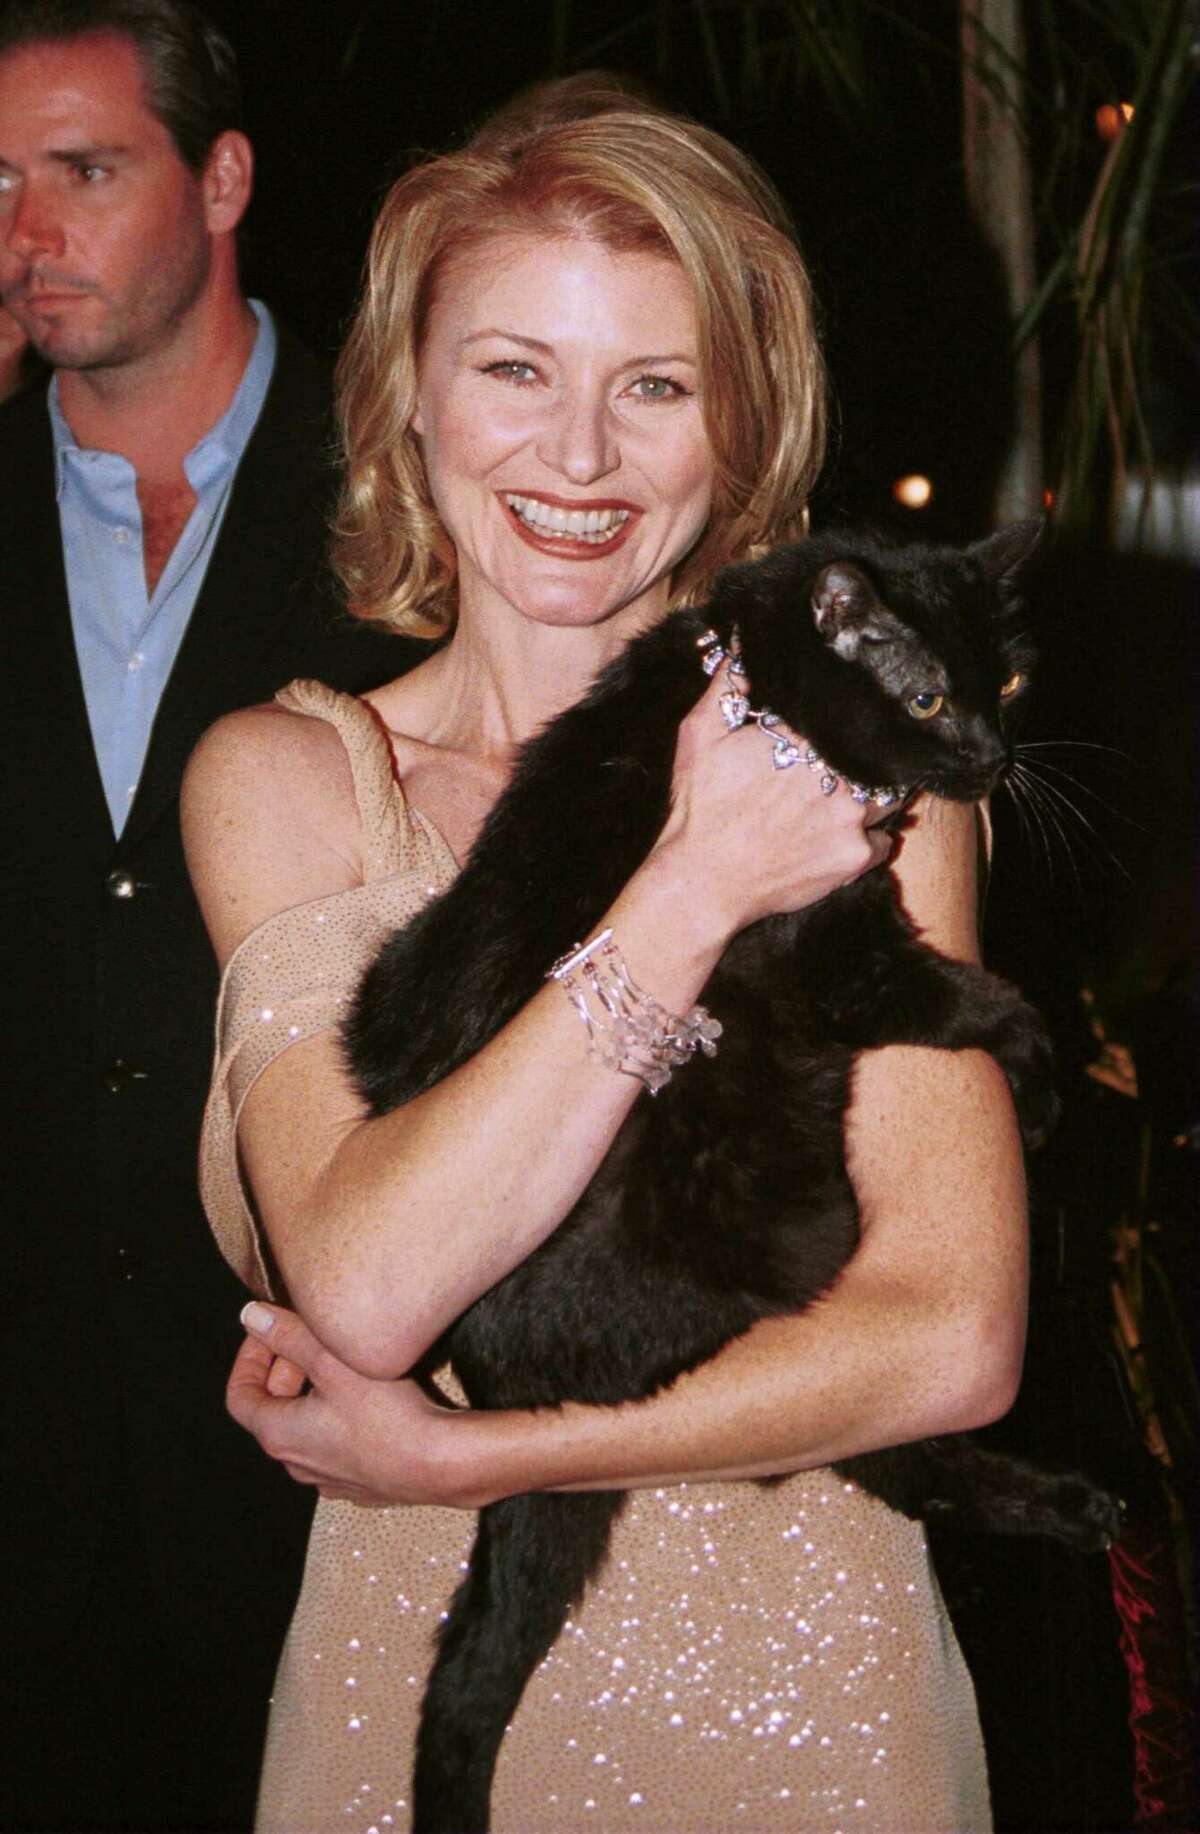 Actress Beth Broderick and the cat Salem arrive for the 100th party of Episode for "Sabrina, the teenage witch" at the Sunset Room on October 23, 2000 in Hollywood, CA.  (Photo by Frederick M. Brown/Online)